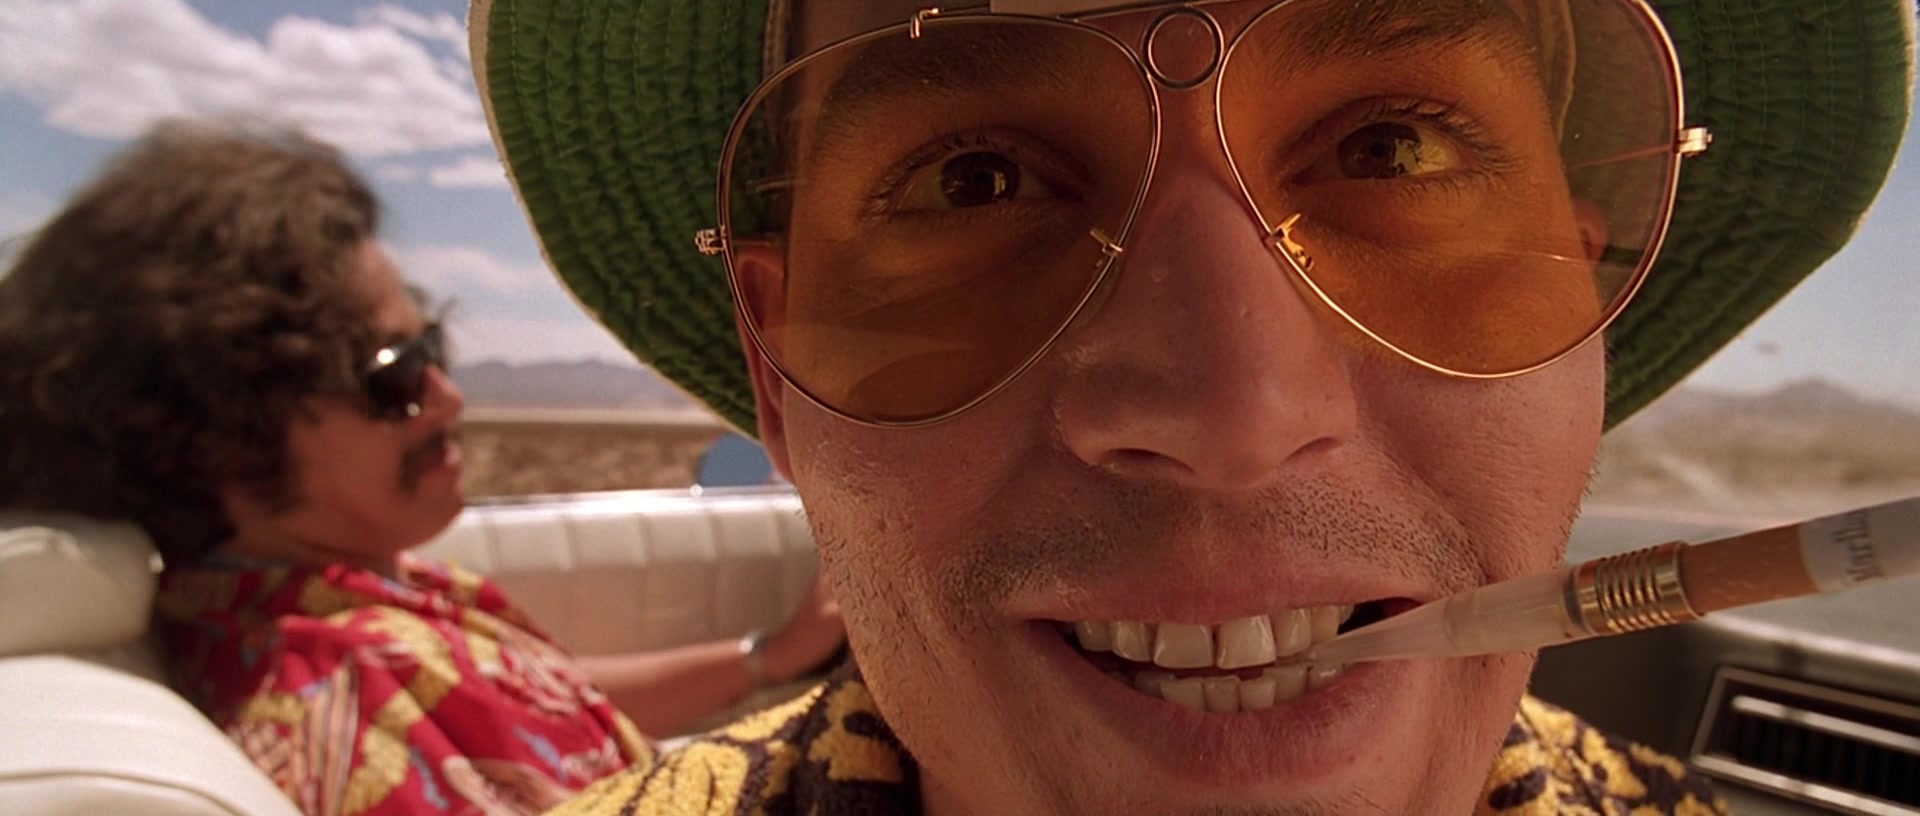 Ray-Ban Shooter RB3138 Aviator Sunglasses Worn by Johnny Depp in Fear and Loathing in ...